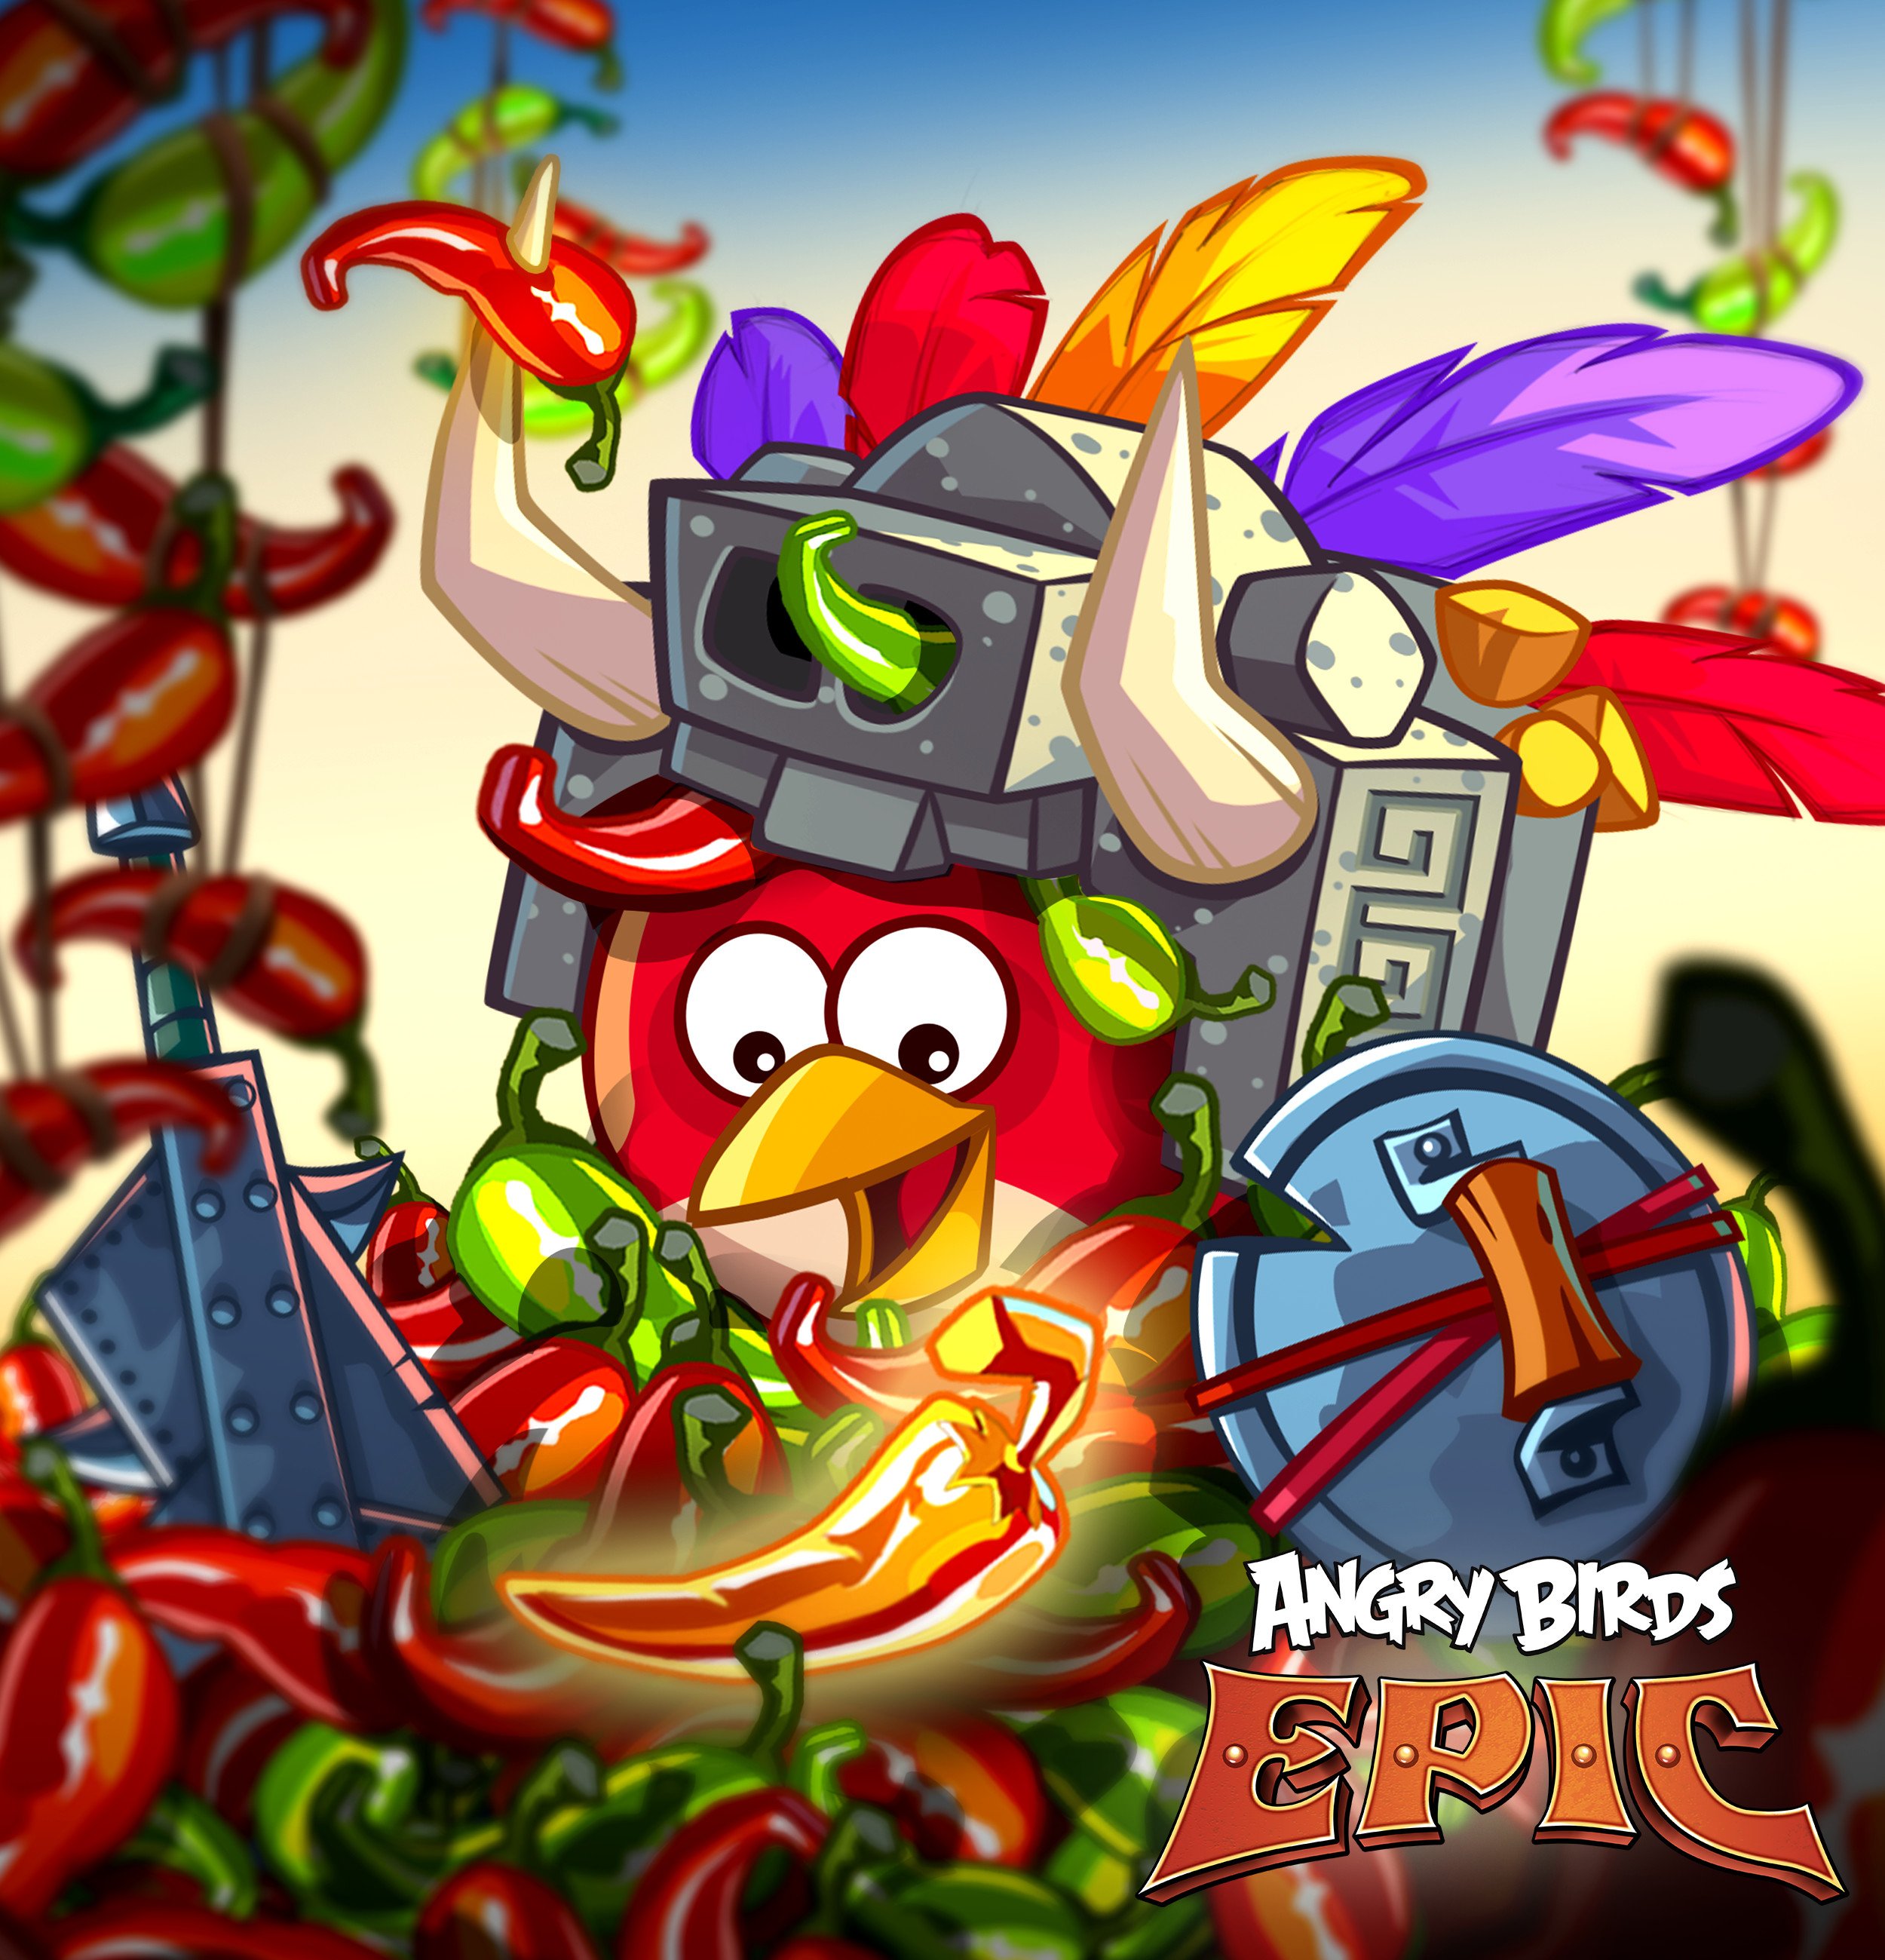 Angry Birds Epic (@ABepic) / X